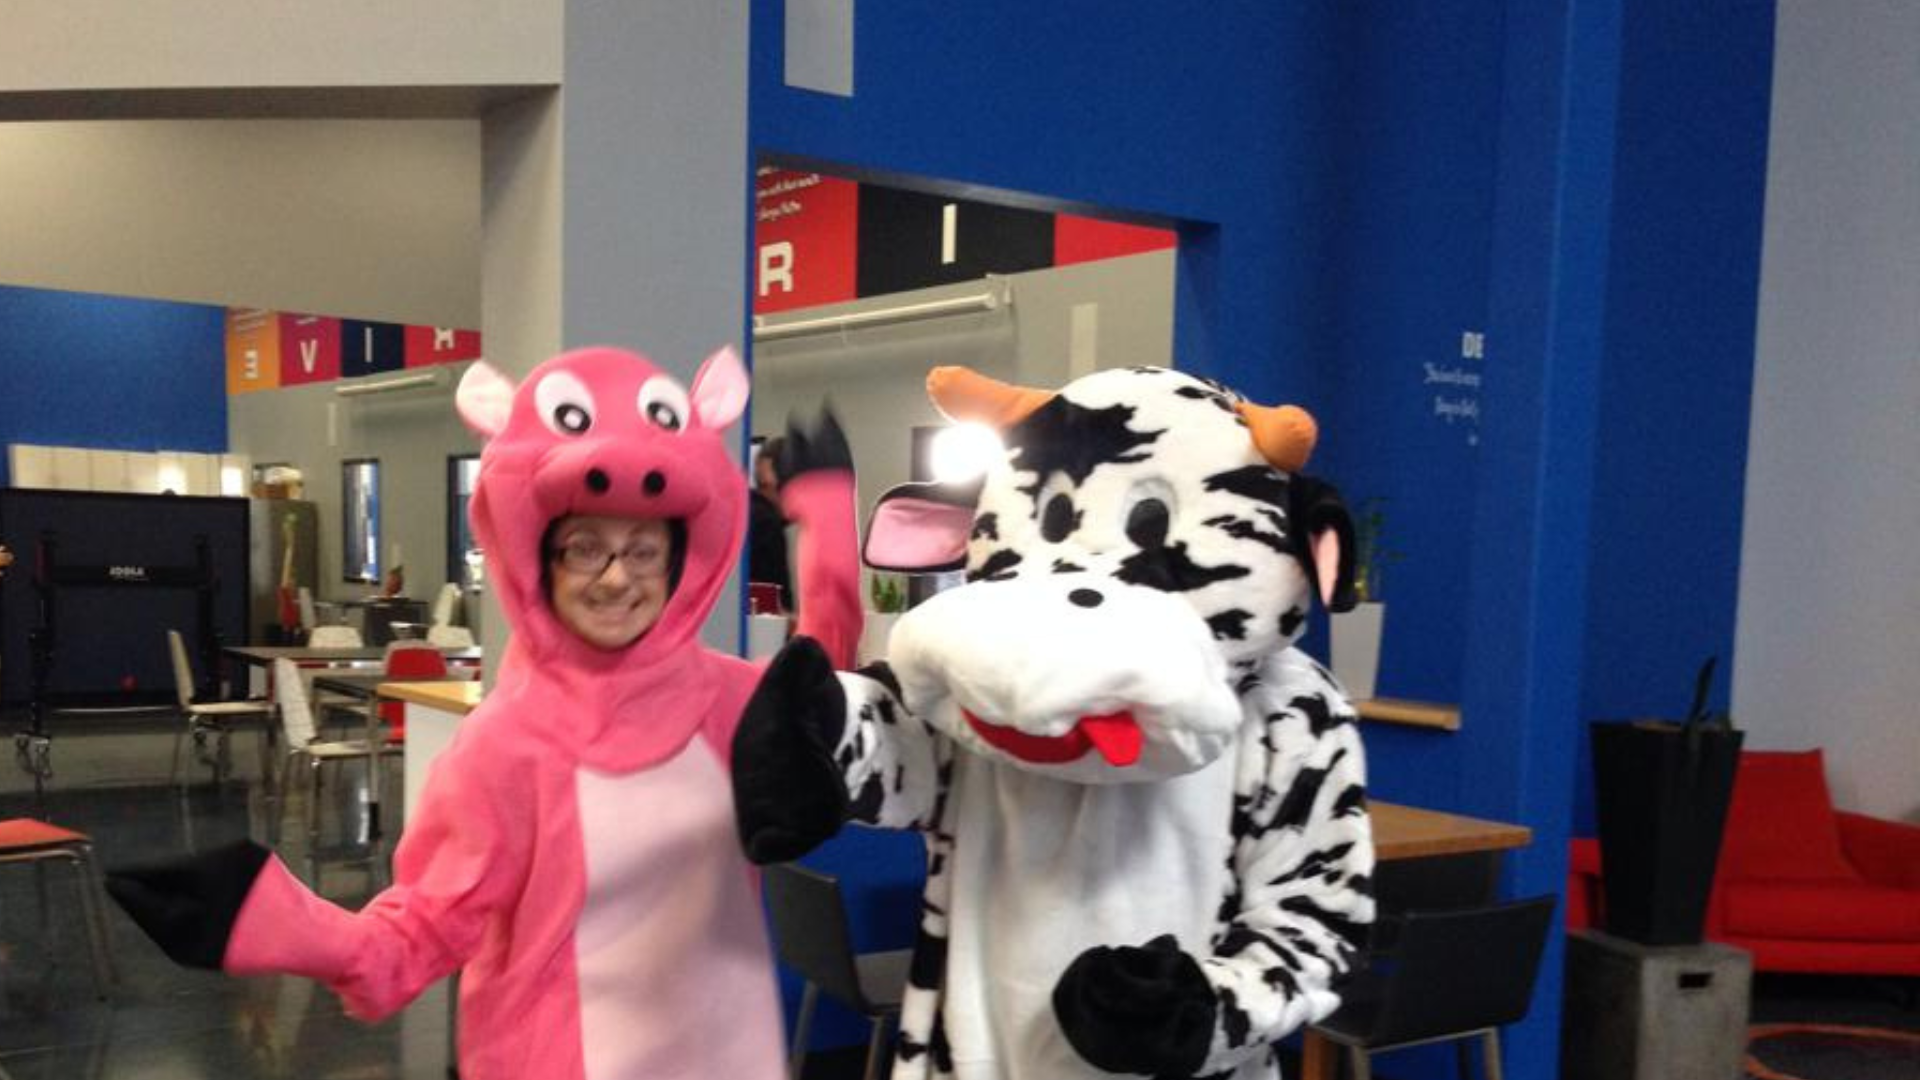 Megan and James, Founders of Happy, dressed as a pig and a cow